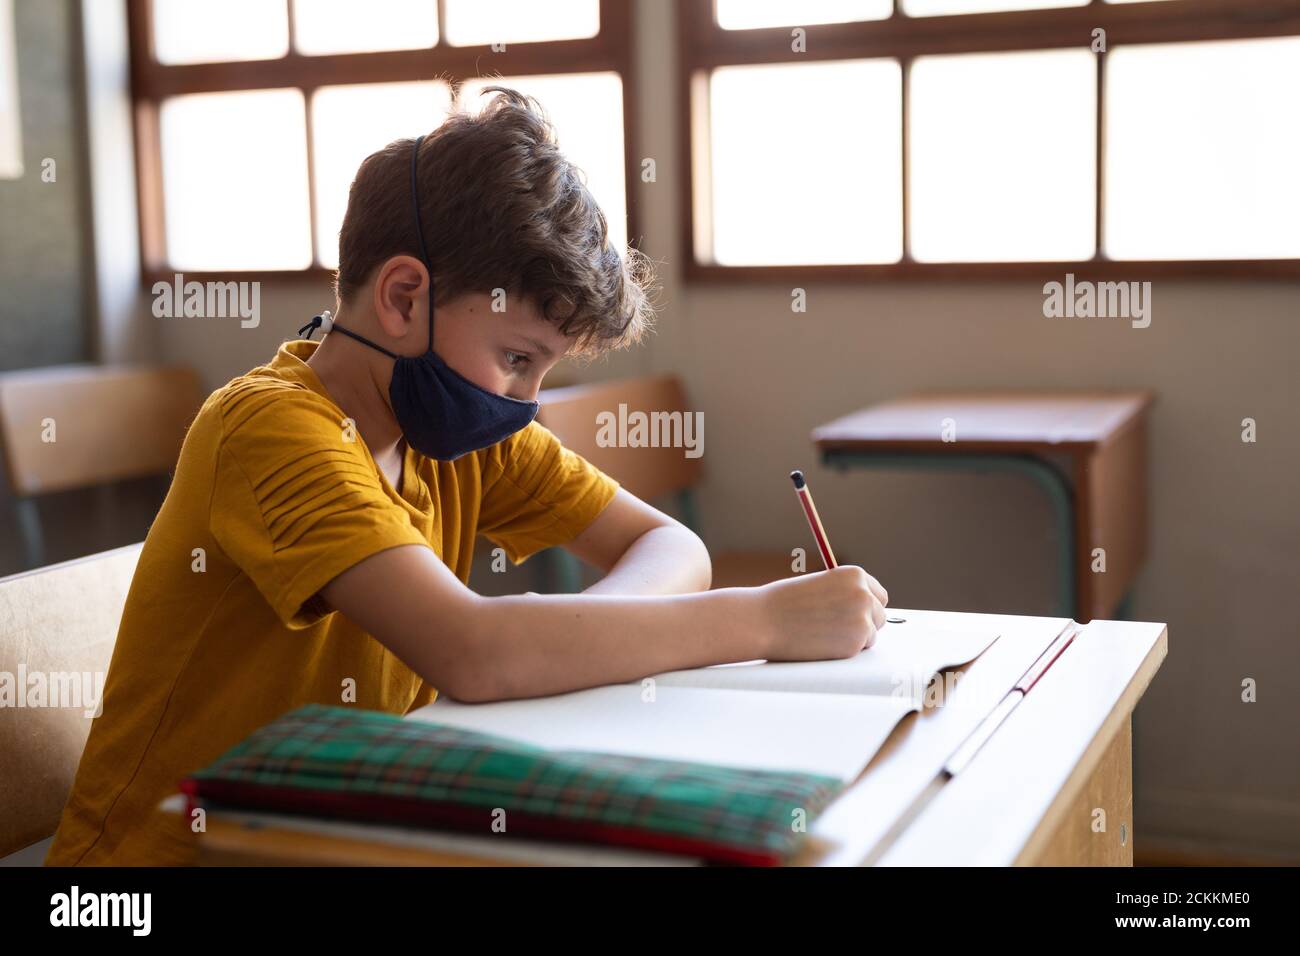 Boy wearing face mask writing while sitting on his desk at school Stock Photo